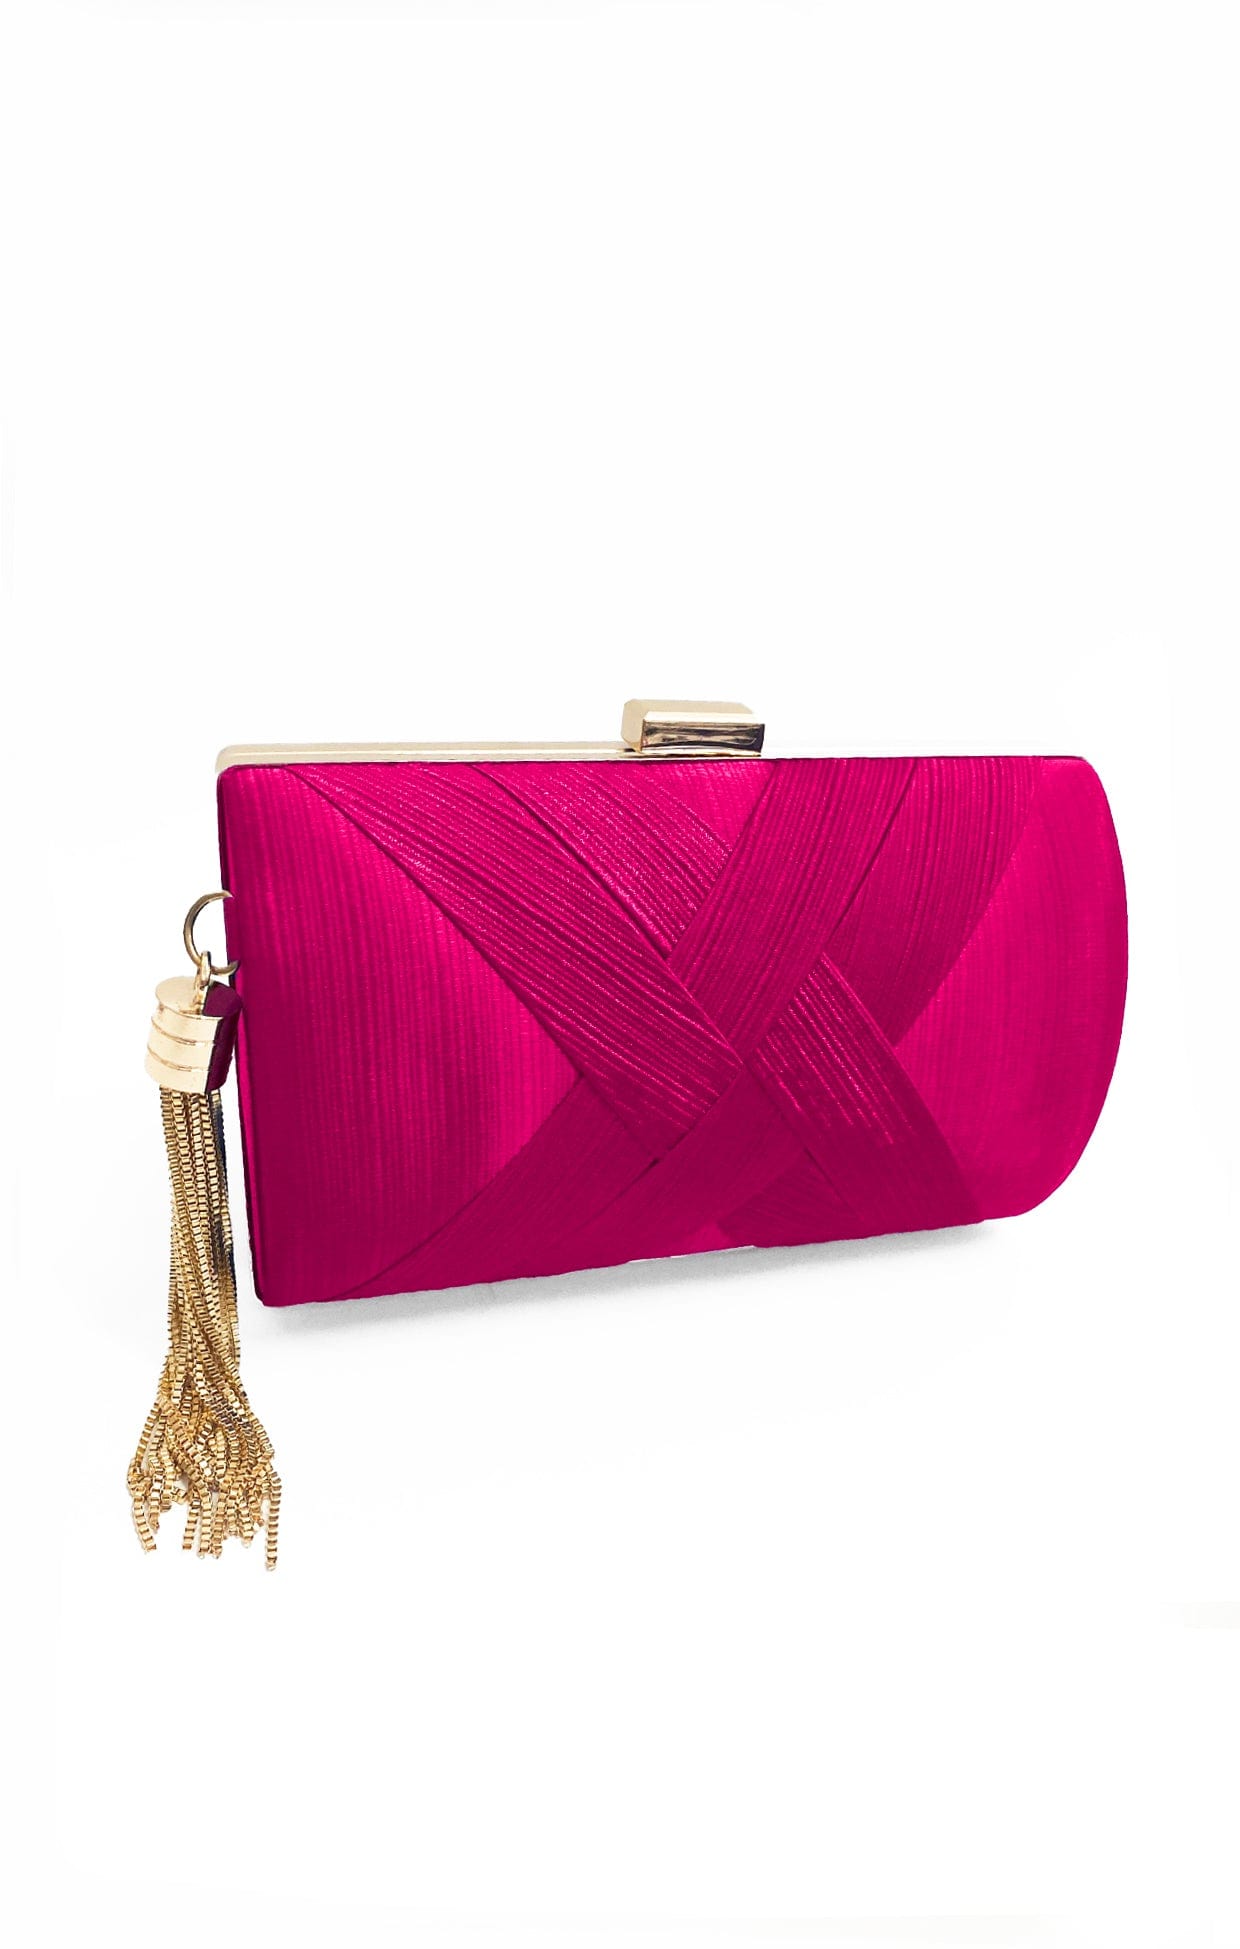 ACCESSORIES Bags Clutches One Size / Pink DEANNA EVENING BAG IN HOT PINK